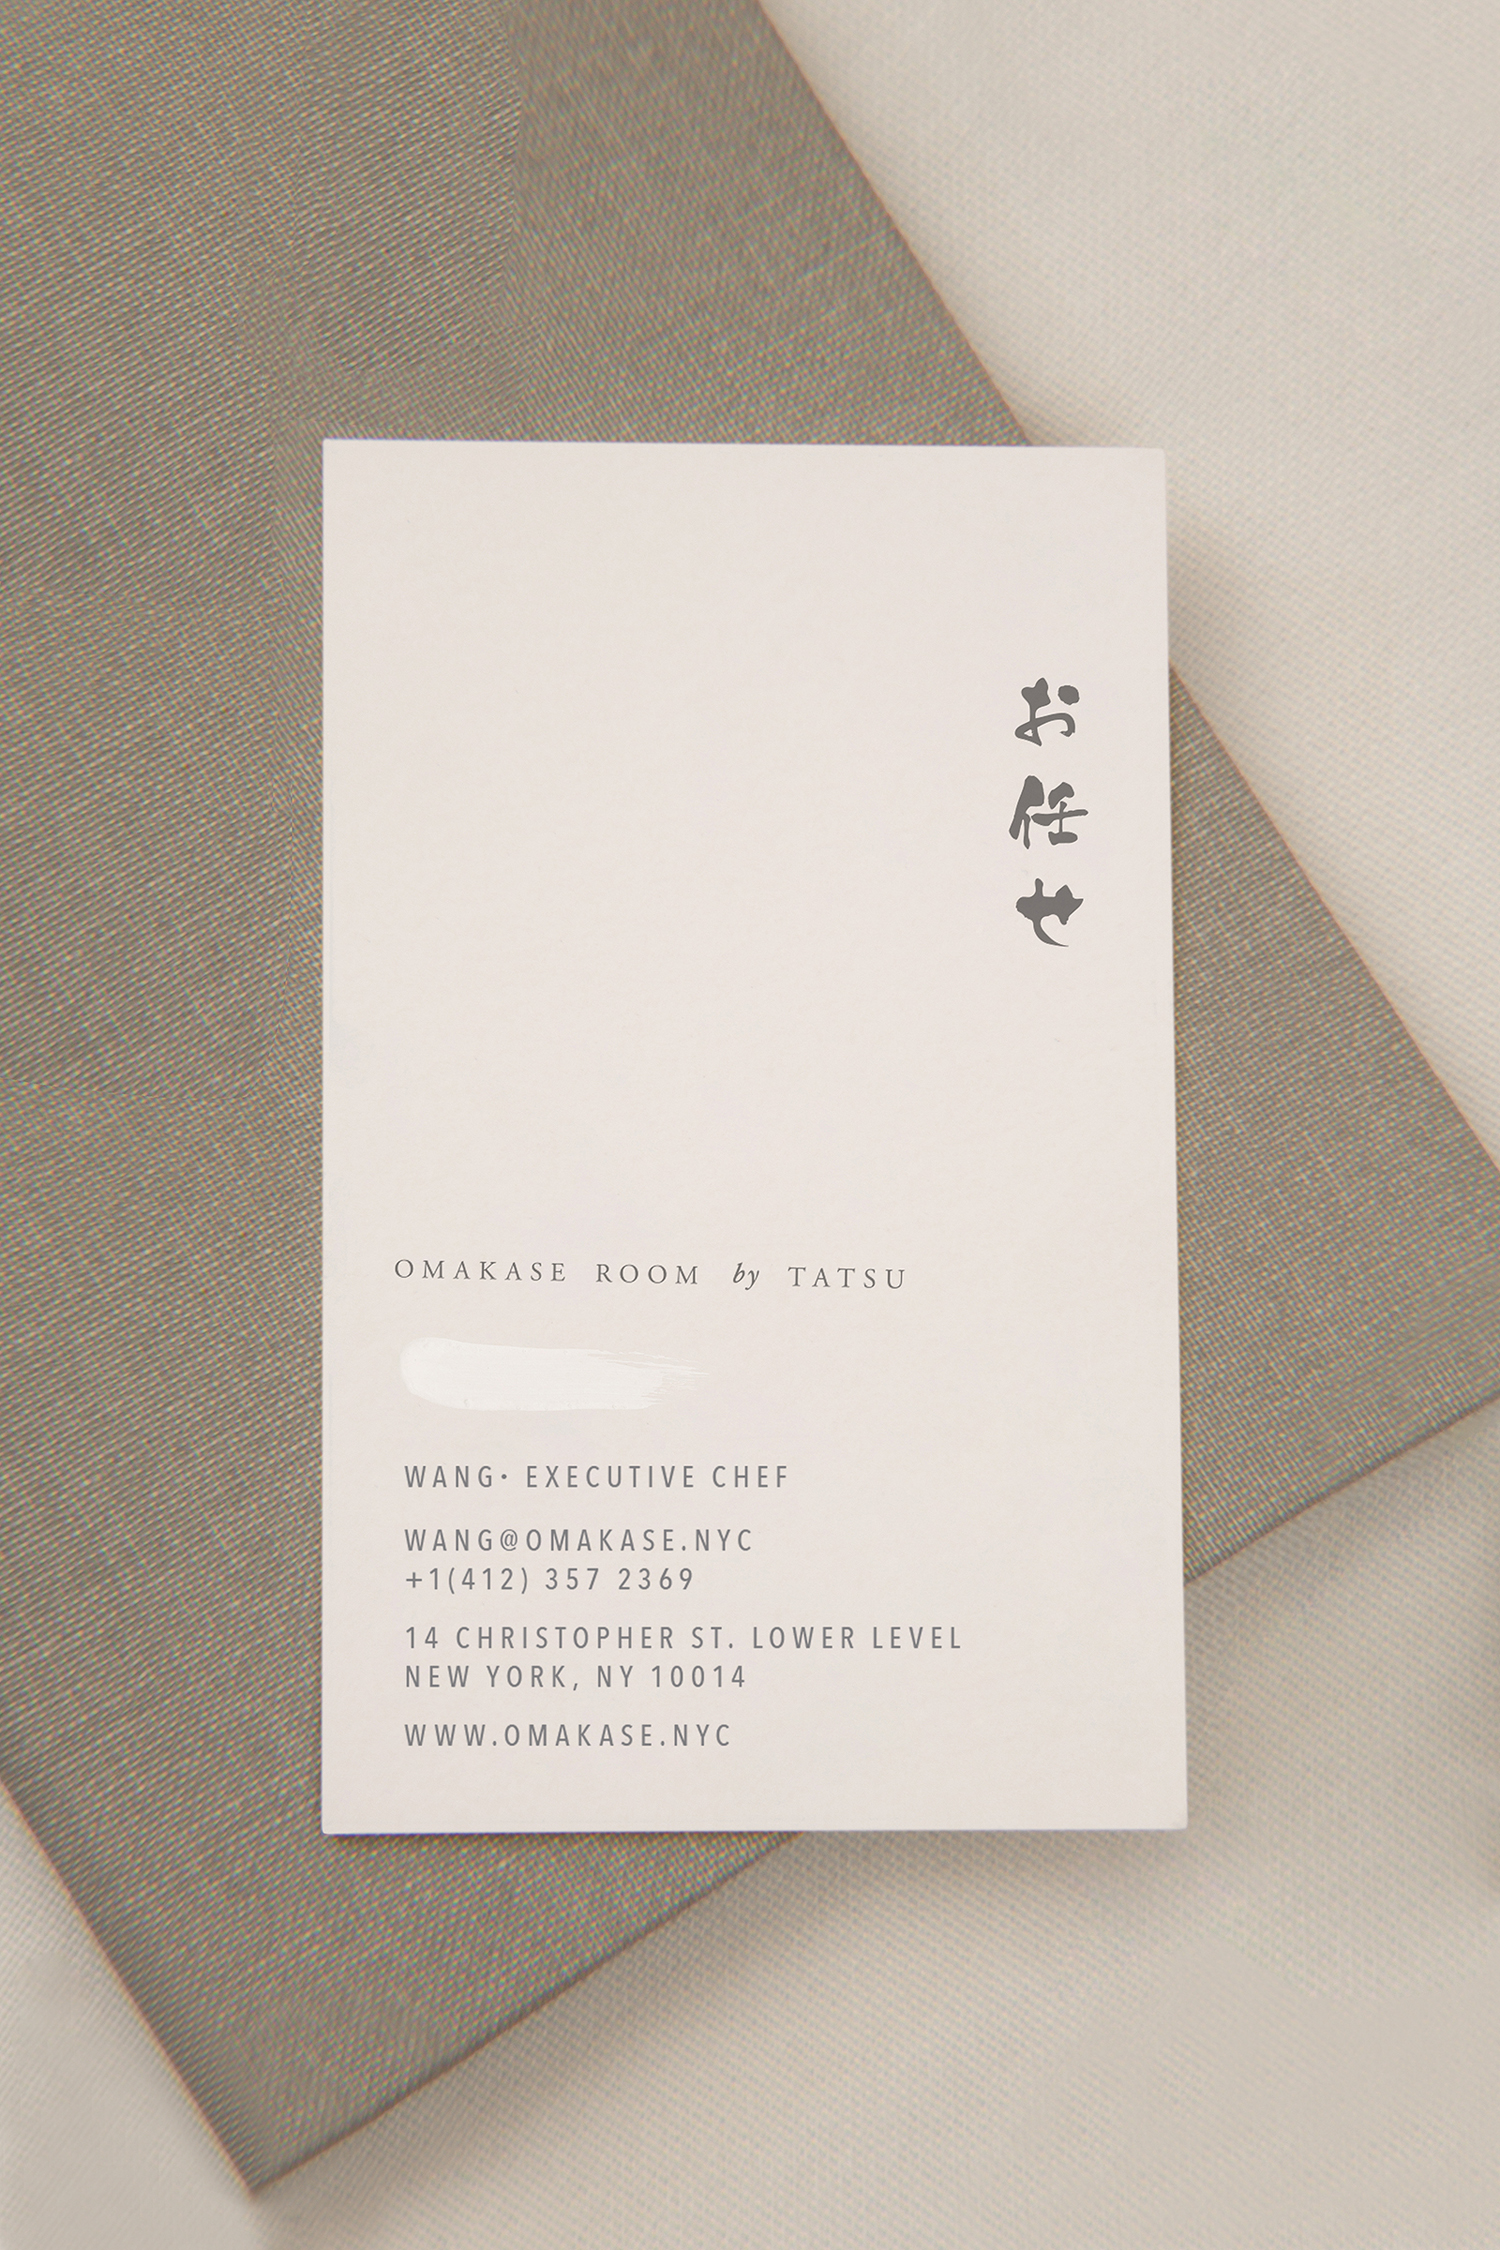 The Best Business Cards Designs of 2017 – Omakase Room by Savvy, United States